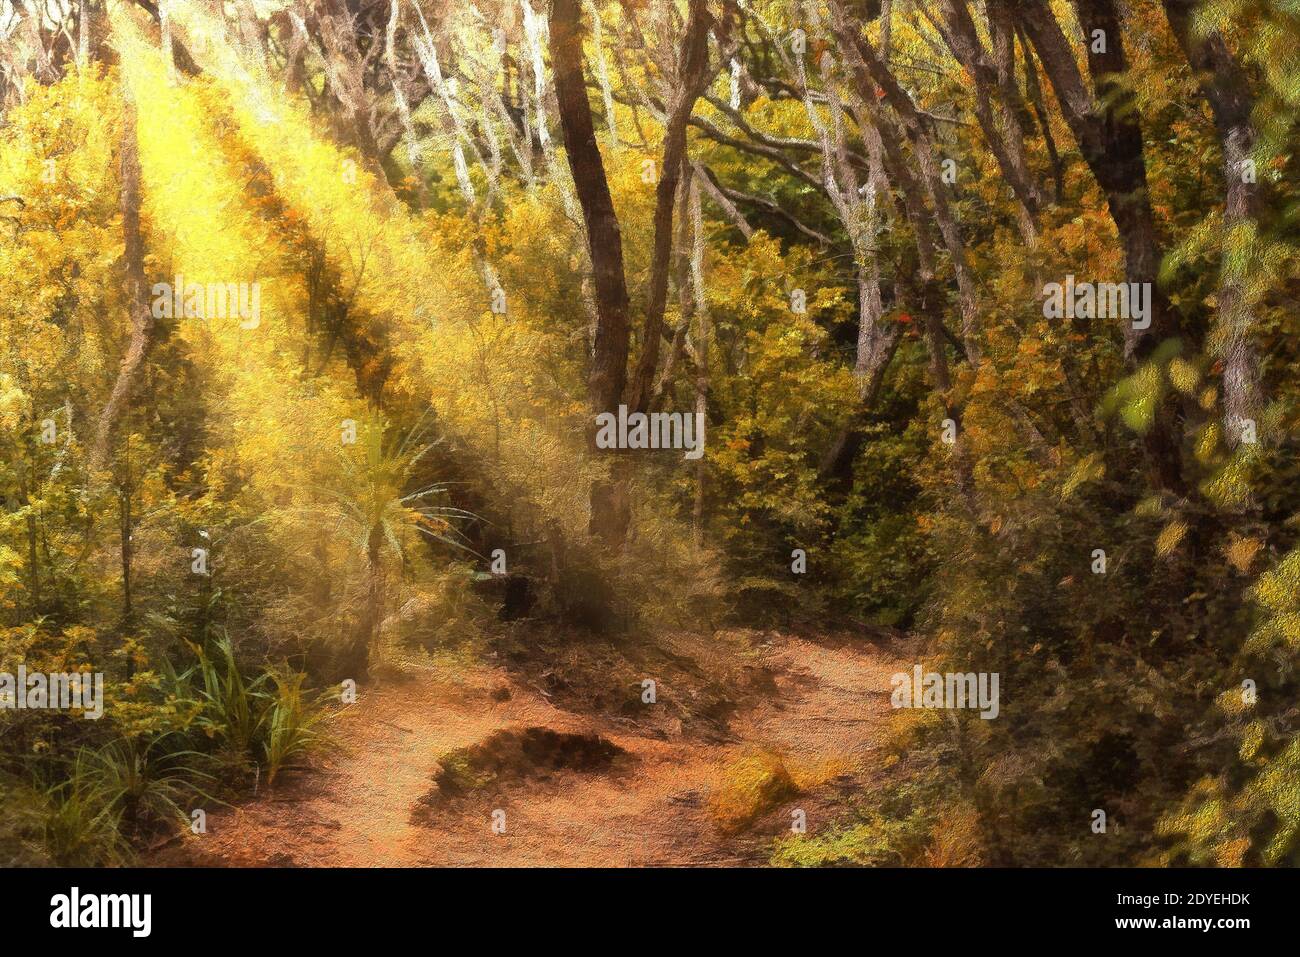 Sunlight streaming through the forest canopy on a path below Stock Photo